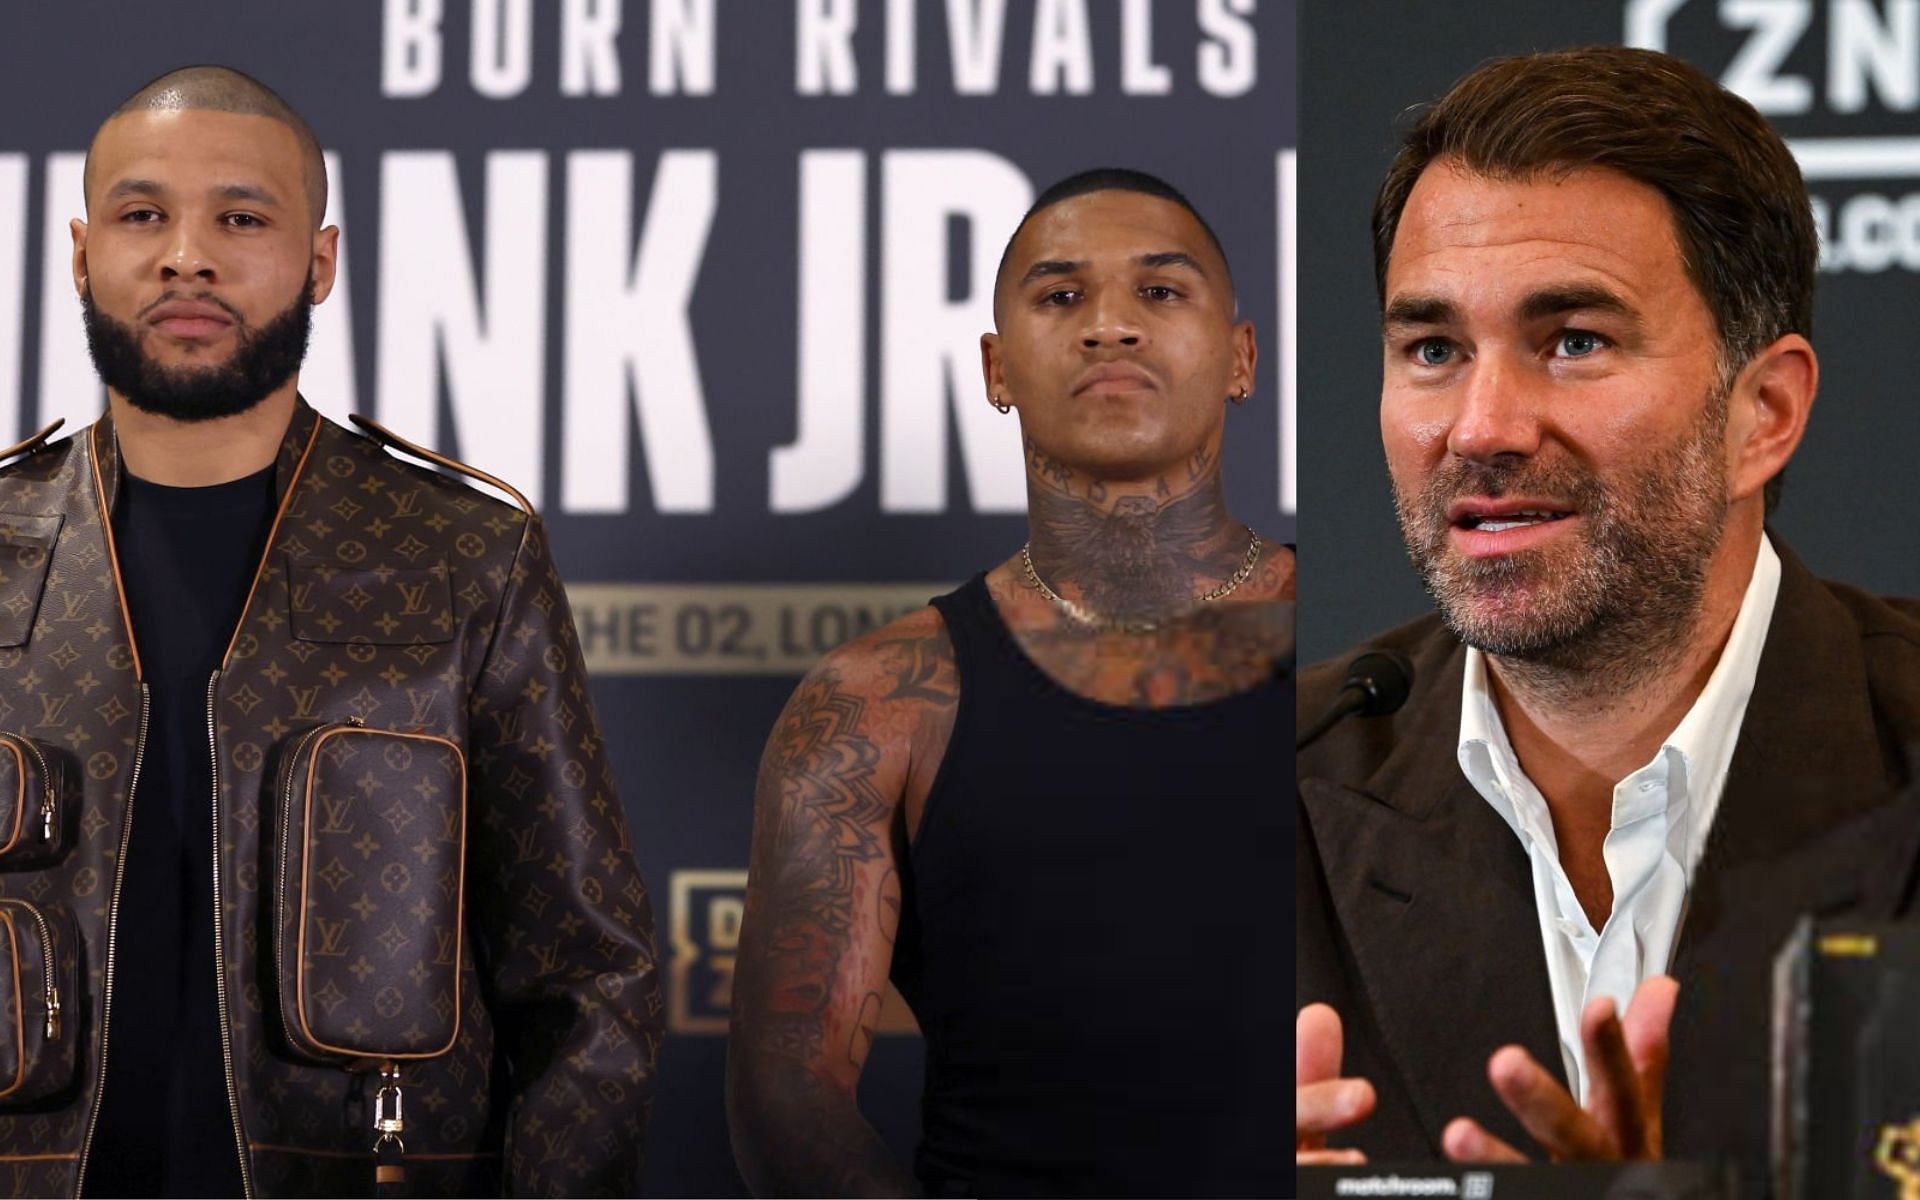 Chris Eubank Jr. and Conor Benn (left) and Eddie Hearn (right) [Images Courtesy: @GettyImages]